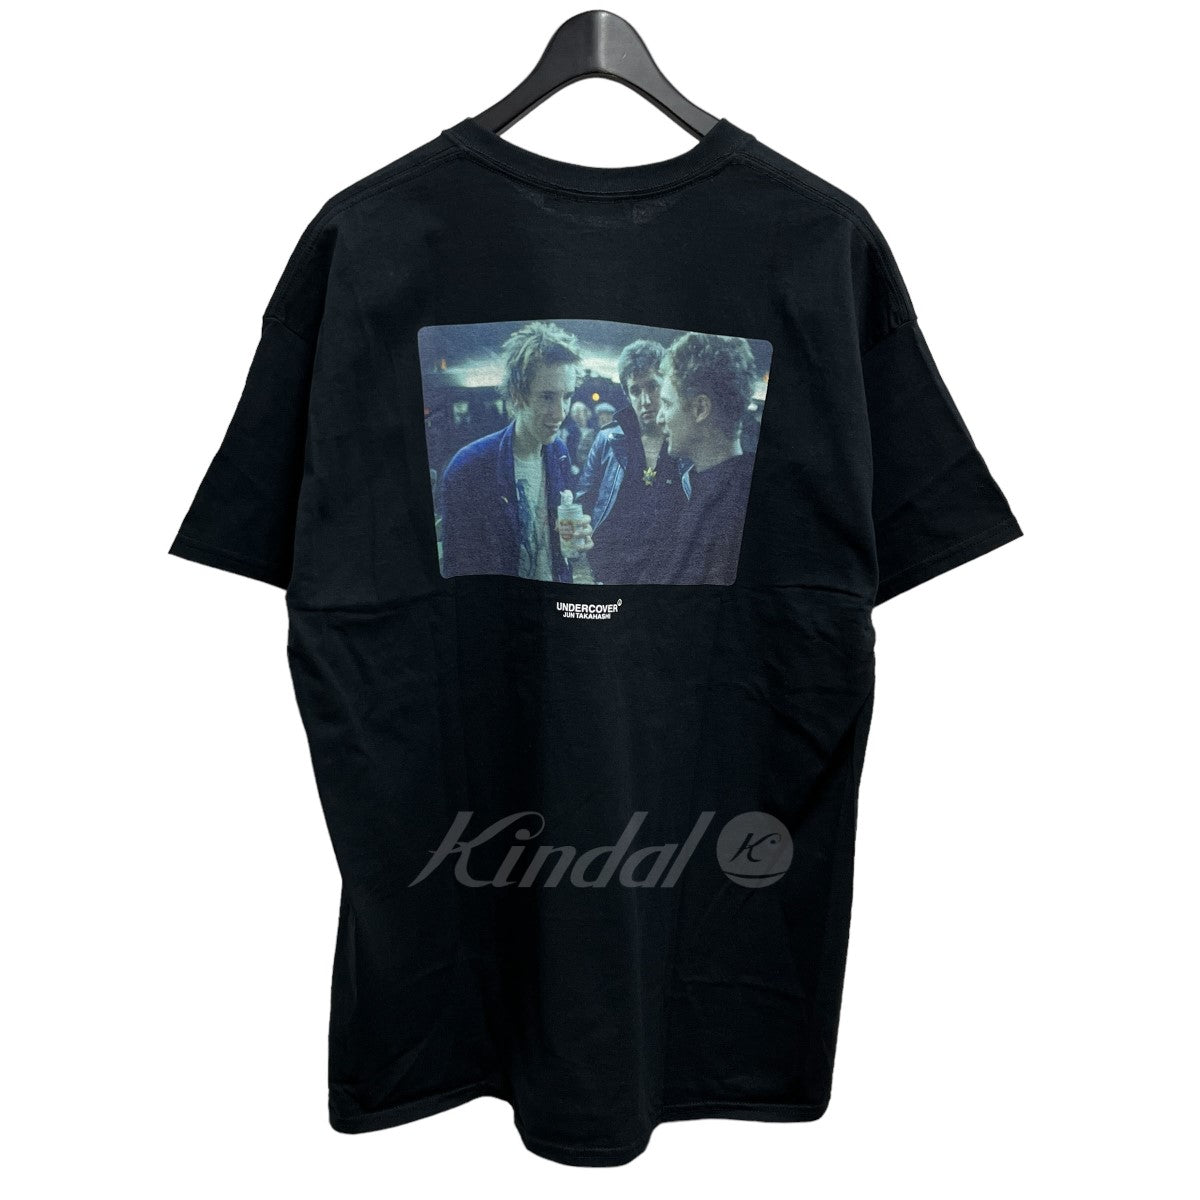 UNDER COVER(アンダーカバー) D．O．A． × UNDERCOVERコラボTシャツ 